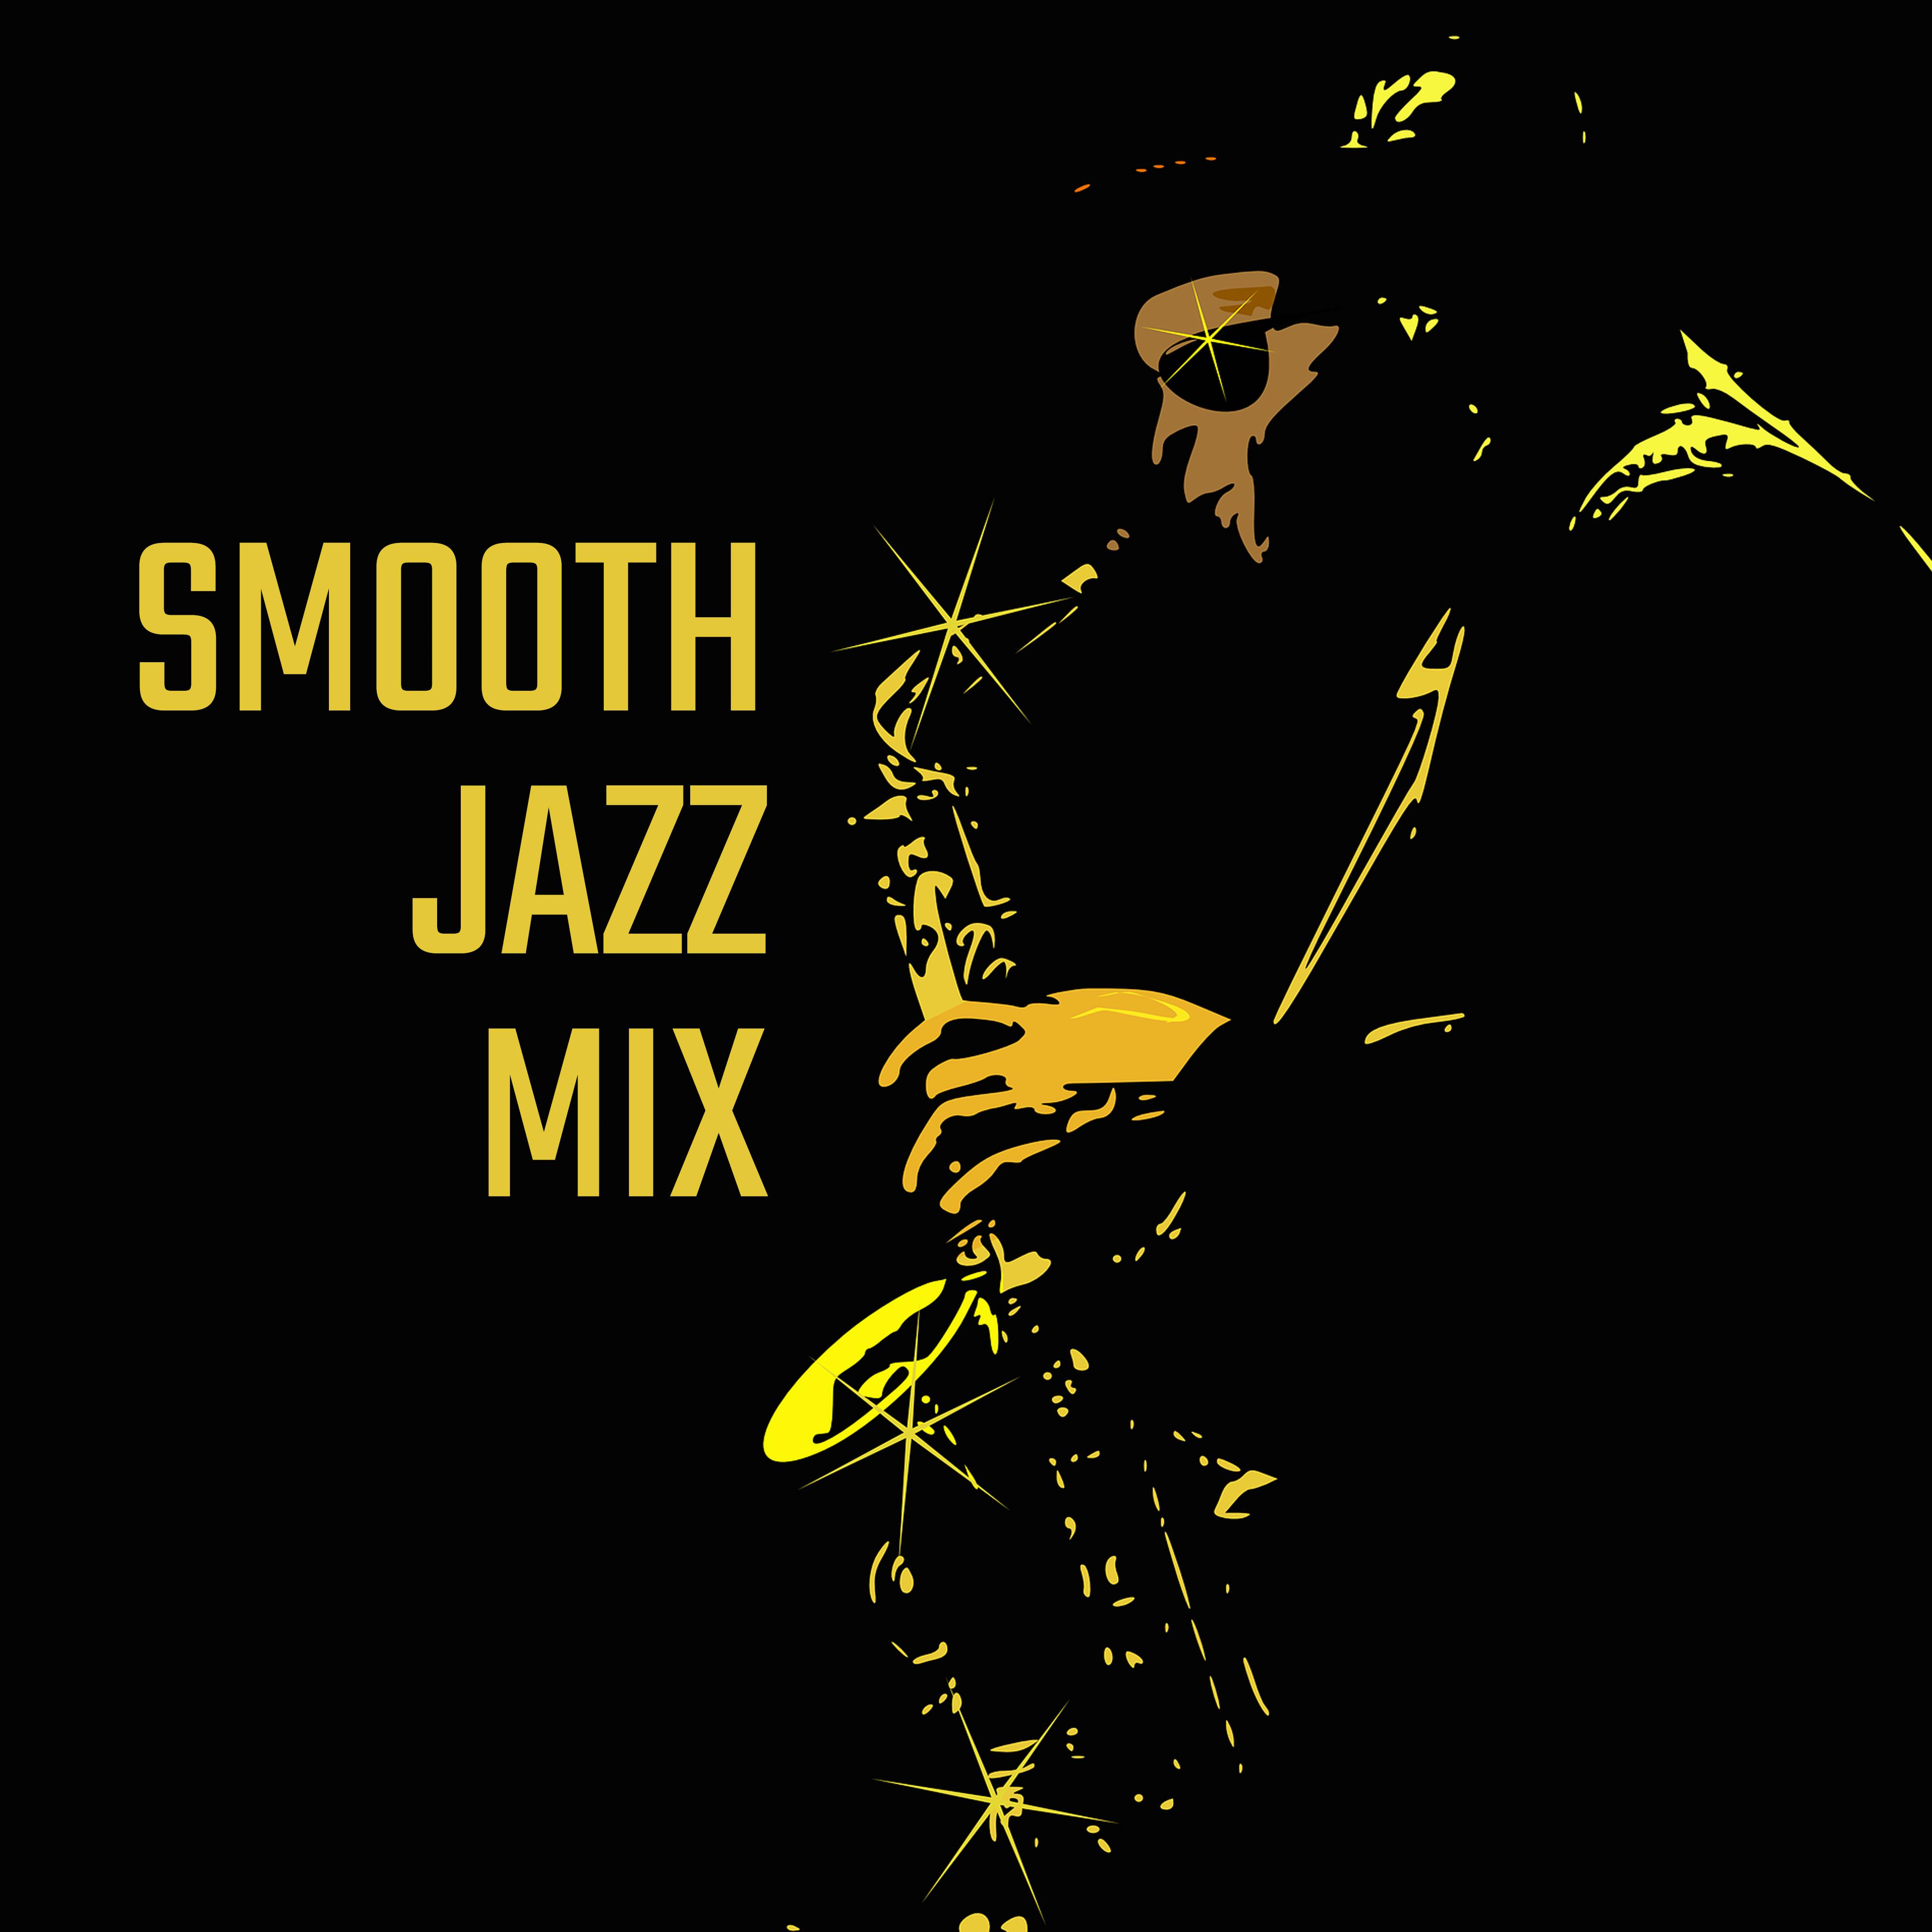 Smooth Jazz Mix  Crazy Saxophone, Piano Music, Instrumental Jazz for Relax  Rest, Dinner Jazz Collective